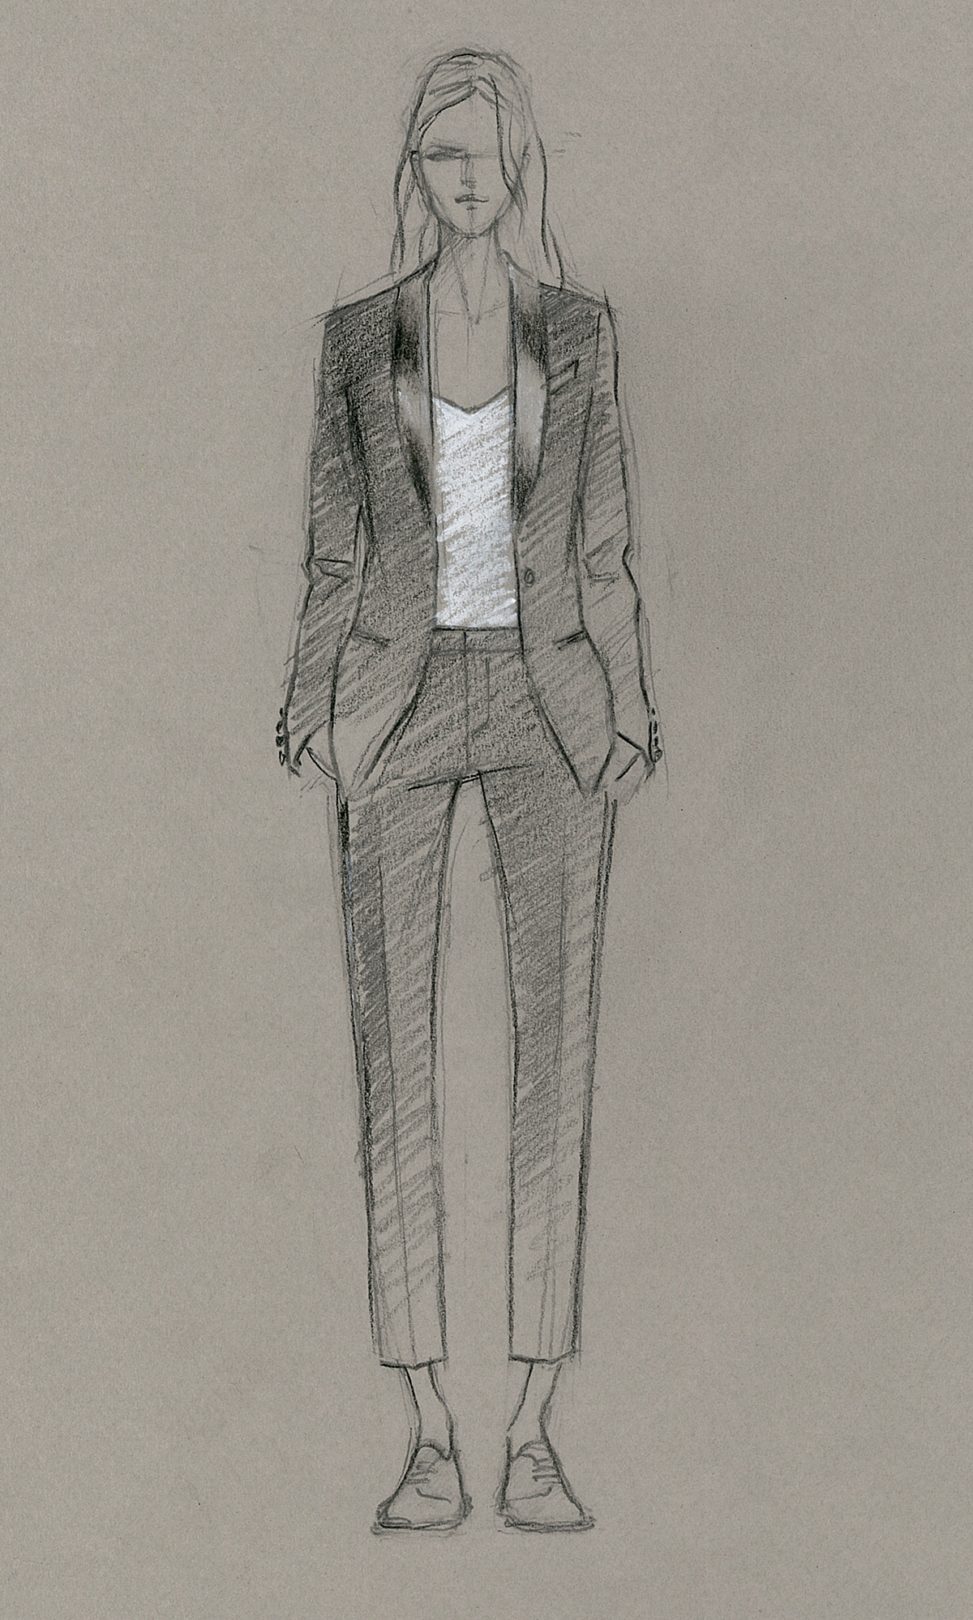 A dark pencil drawing of a woman in a black tuxedo suit